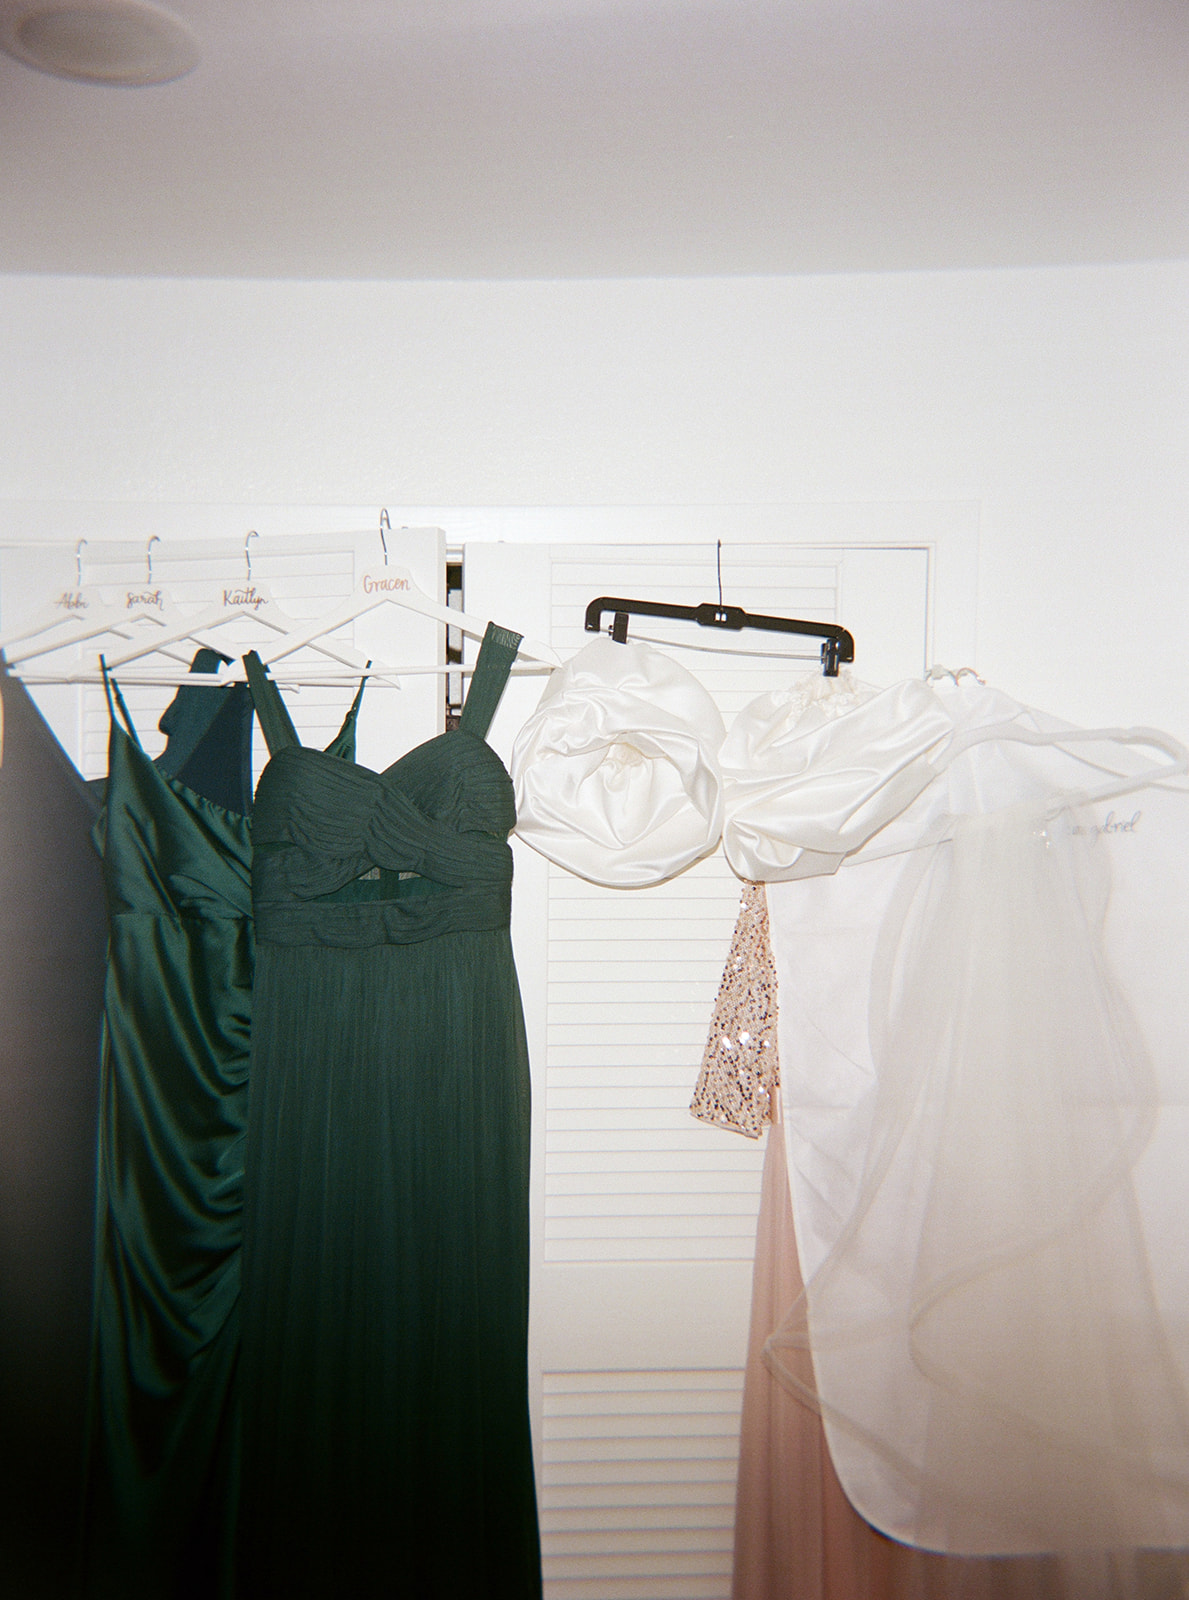 the bridal party dresses hanging up with the bride's dress taken on film